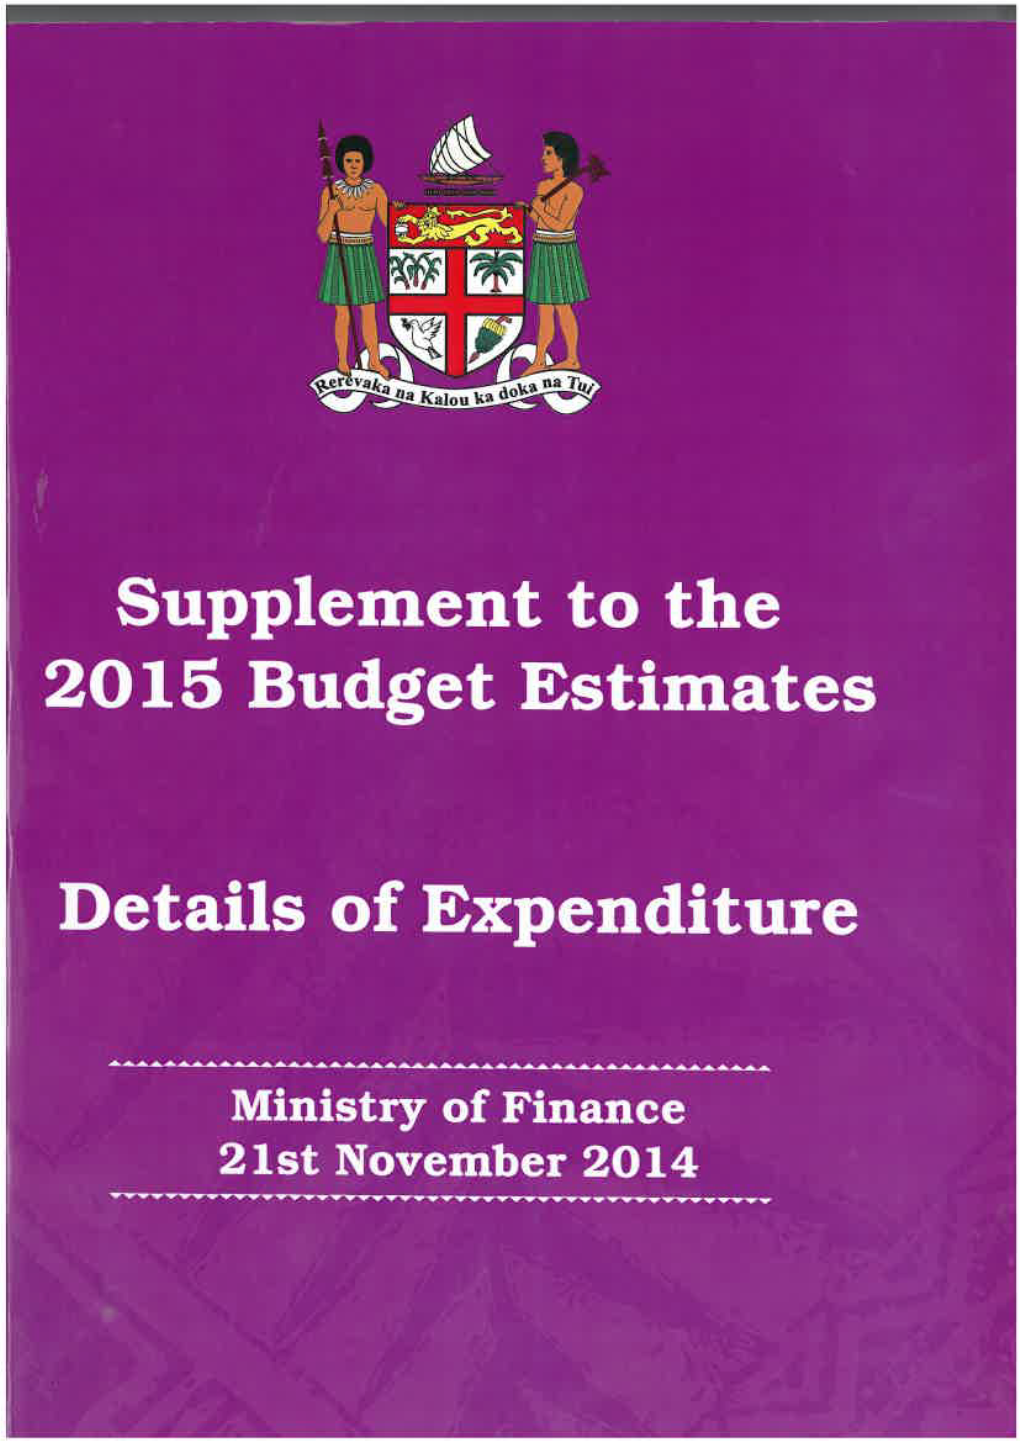 2015 Budget Have Been Placed Under Requisition in Anticipation of These Items Being Funded Through Aid